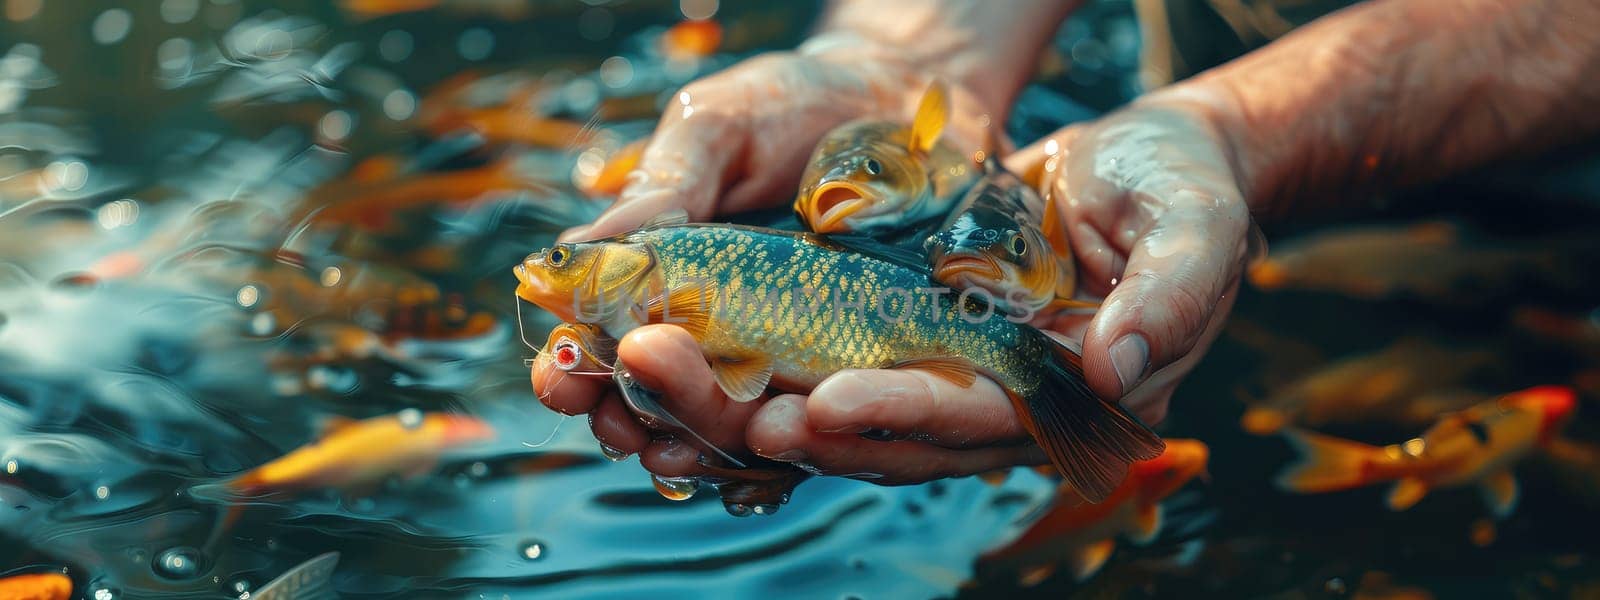 The fisherman holds a fish in his hands. Selective focus. nature.